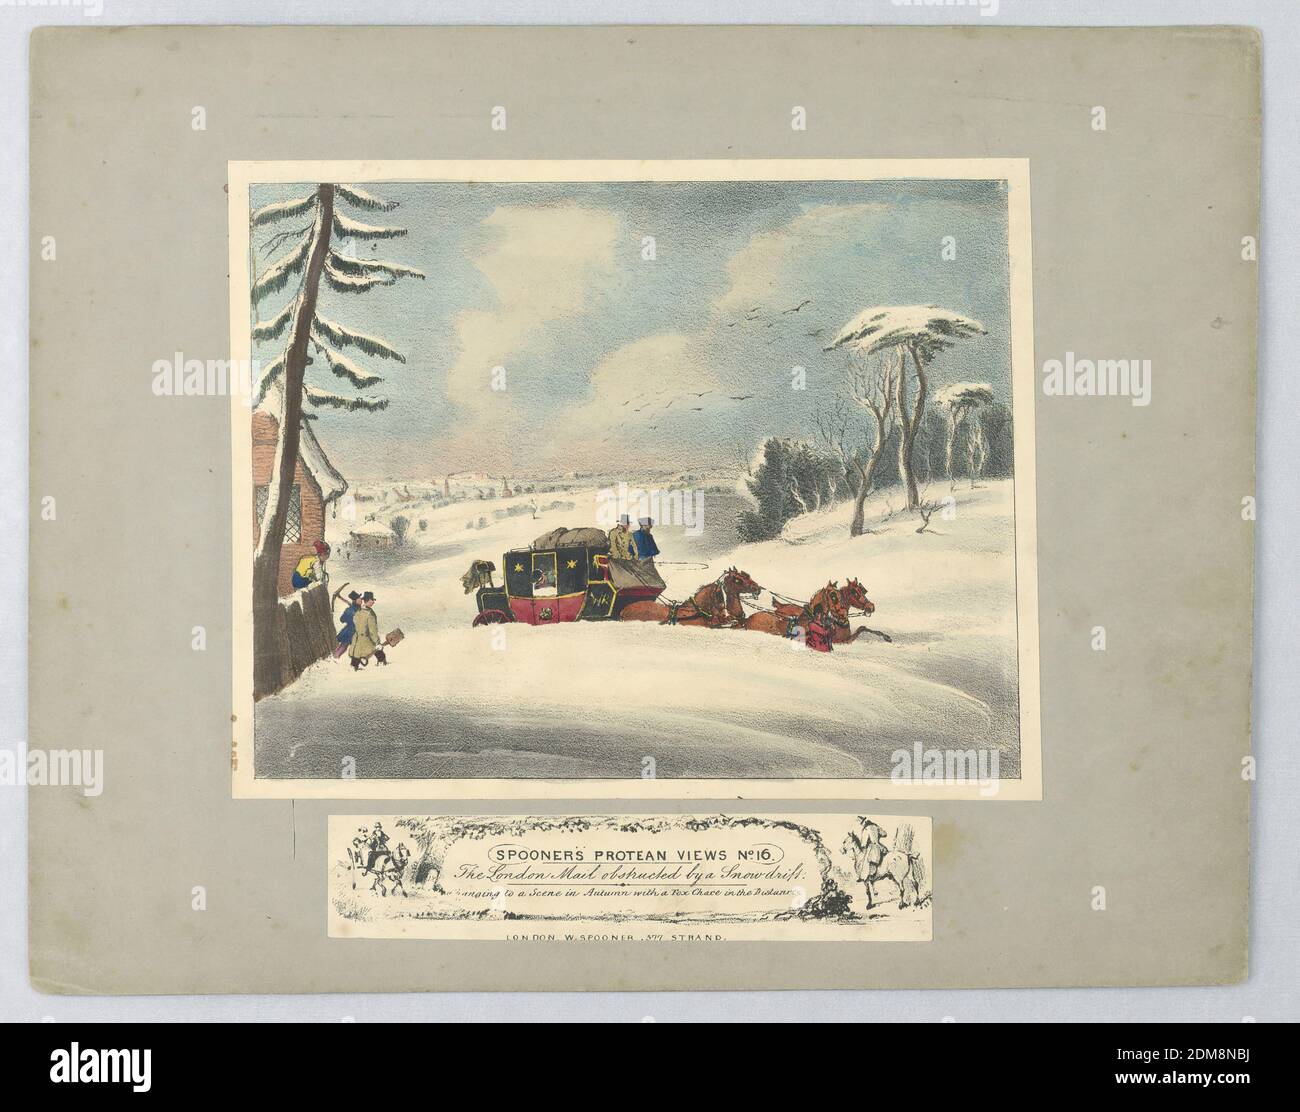 Optical TOy: 'The London Mail Obstructed by a Snowdrift' (Spooner's Protean Views, no. 16), William Spooner, England, active 1830 – 1854, Lithograph, brush and watercolor on paper, mounted, View of a stagecoach making its way up a hill through heavy snow. When held to the light the scene is in autumn with a fox hunt taking place in the distance. Below, title and: 'Changing to a Scene in Autum with a Fox chase [sic] in the Distance'. Below, publisher's name., London, England, ca. 1838, Print Stock Photo